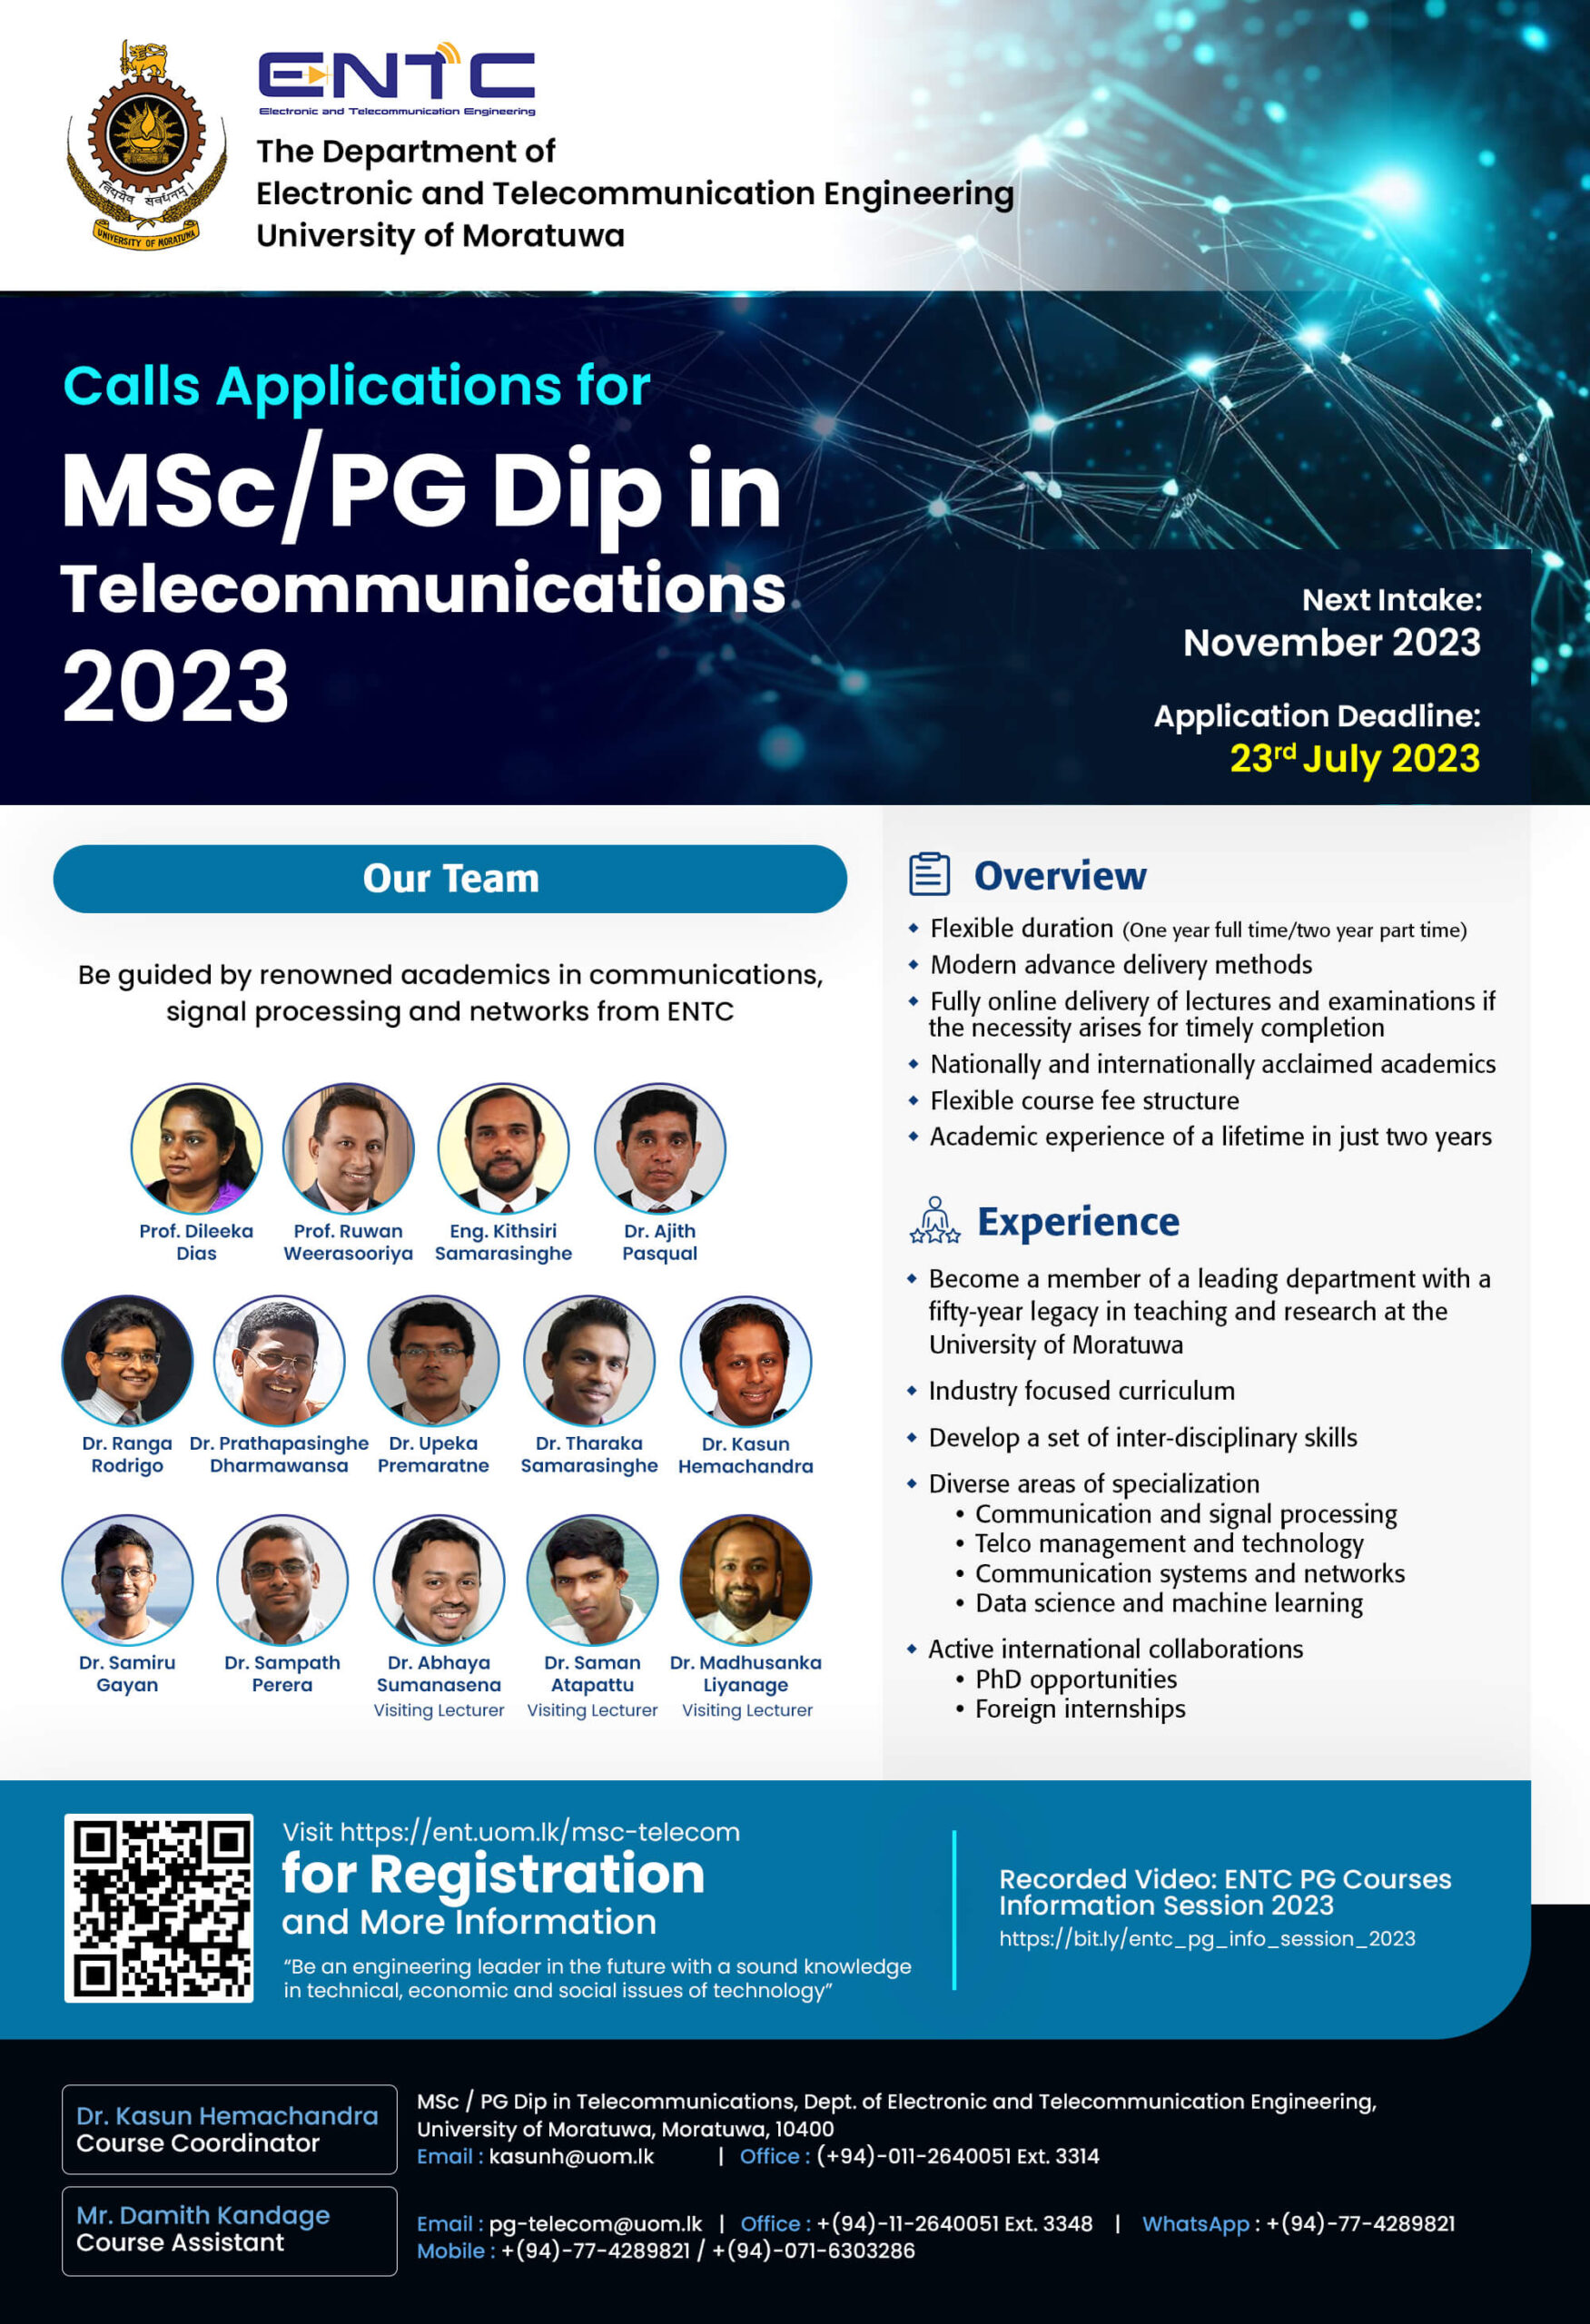 MSc/PG Diploma in Telecommunications